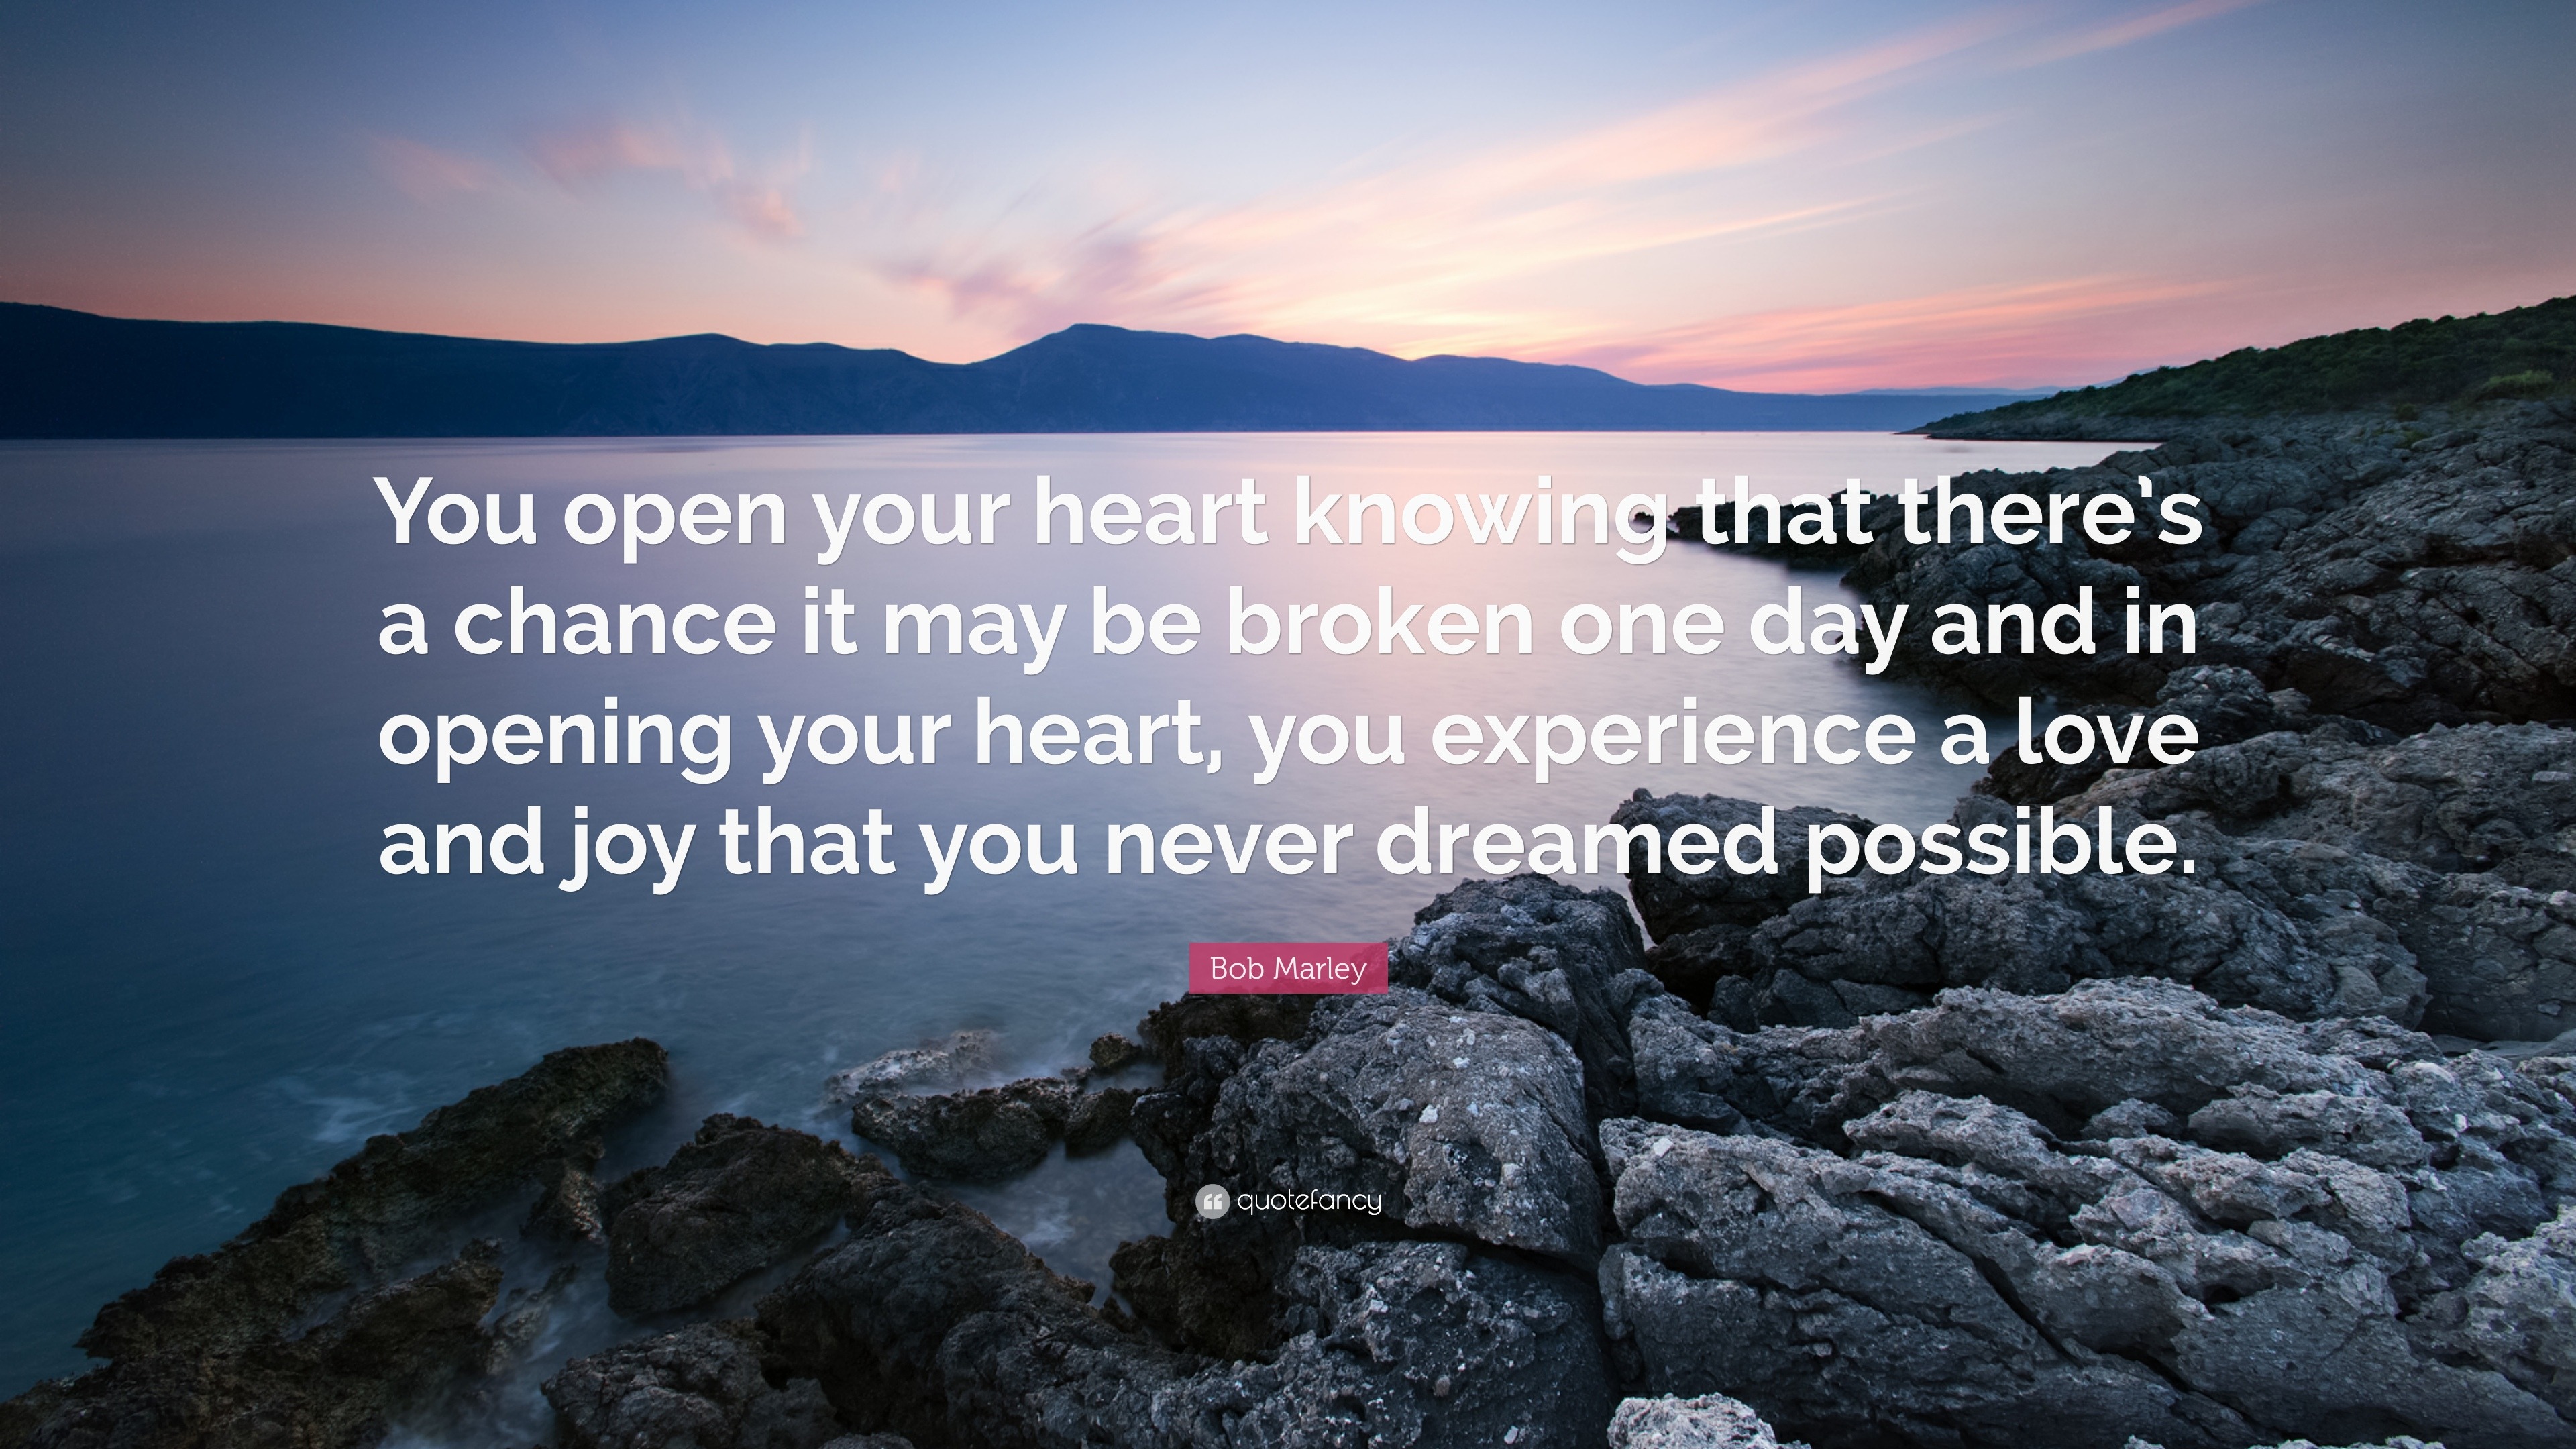 Bob Marley Quote “You open your heart knowing that there s a chance it may